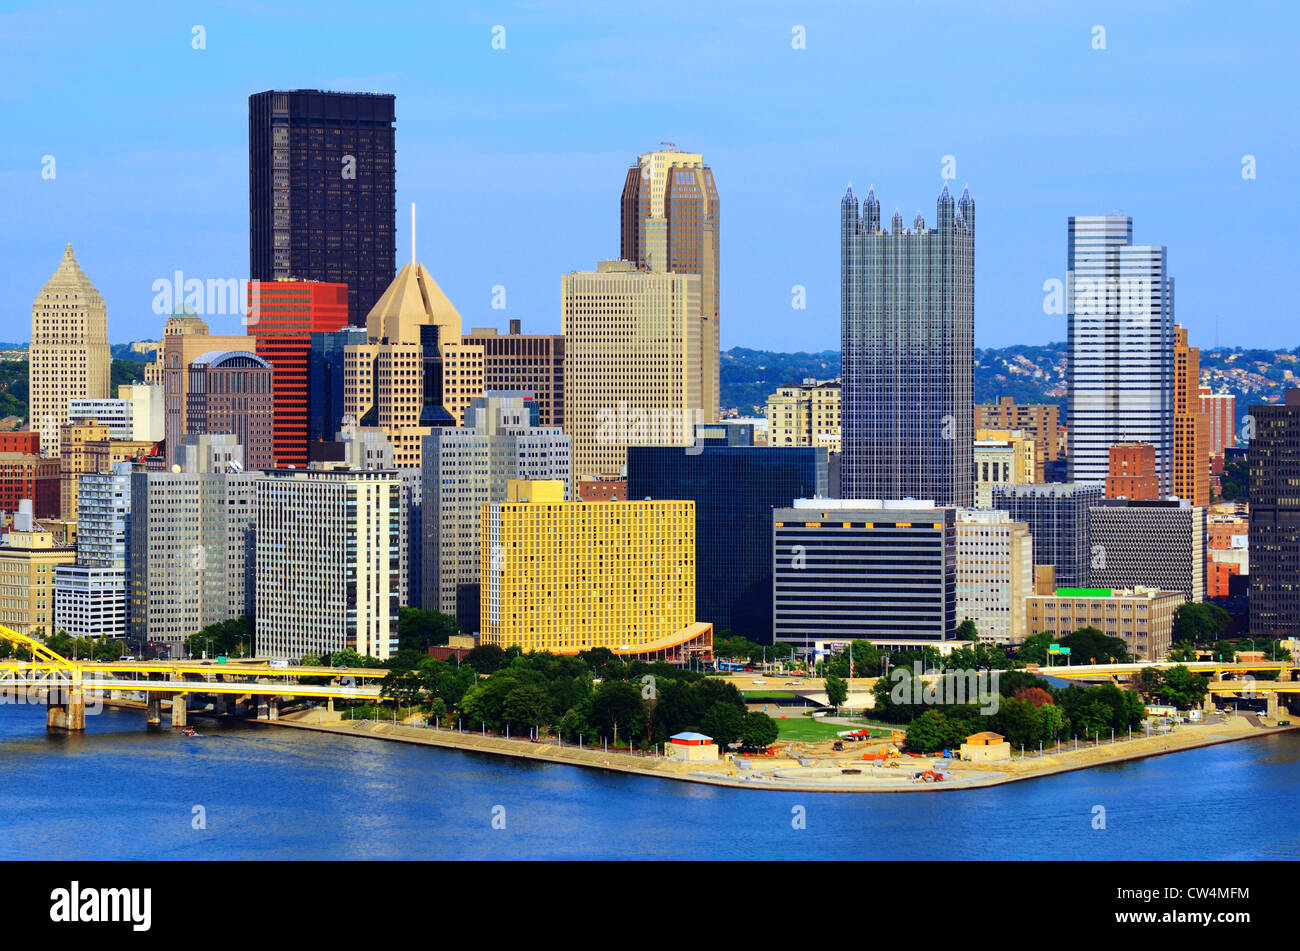 Skyscrapers in downtown PIttsburgh, Pennsylvania, USA. Stock Photo